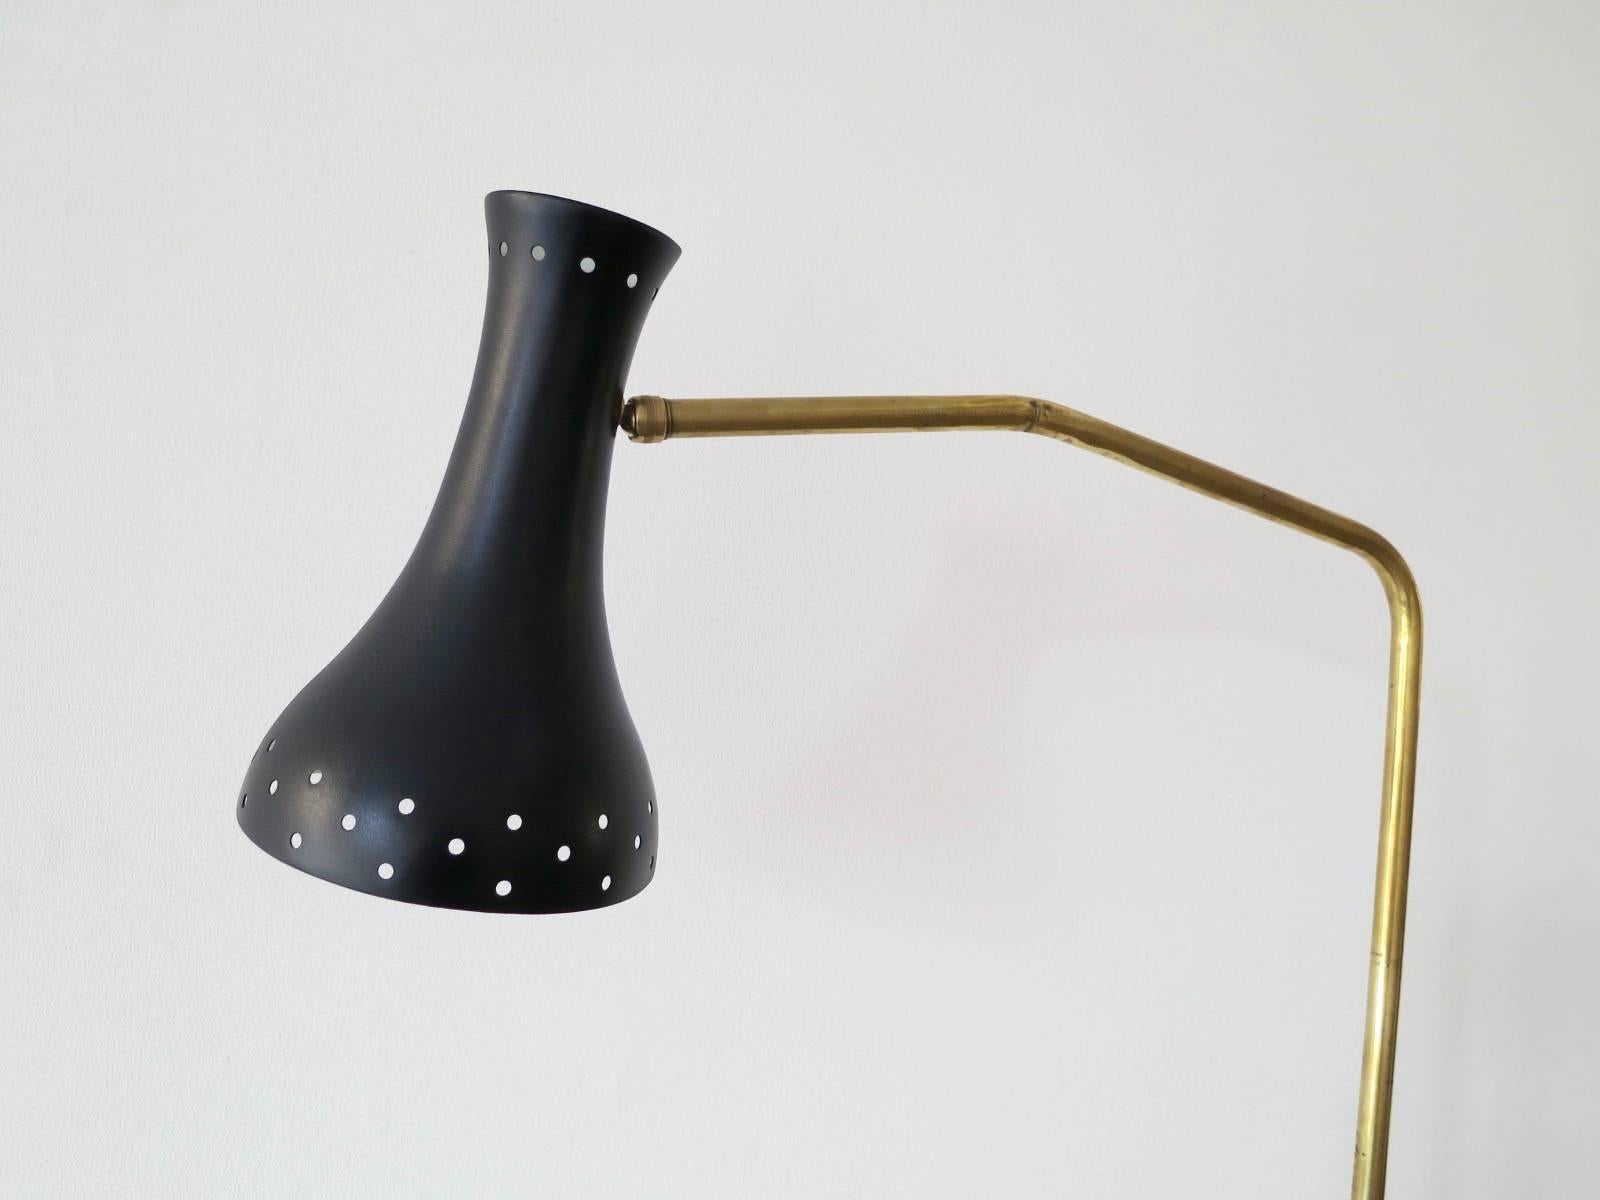 A versatile floor lamp in brass with a black painted and perforated shade. The base in cast iron with a segmented wooden base cover. The brass stem on a pivotable ball joint allowing a wide range of movement and also telescopic stem for height